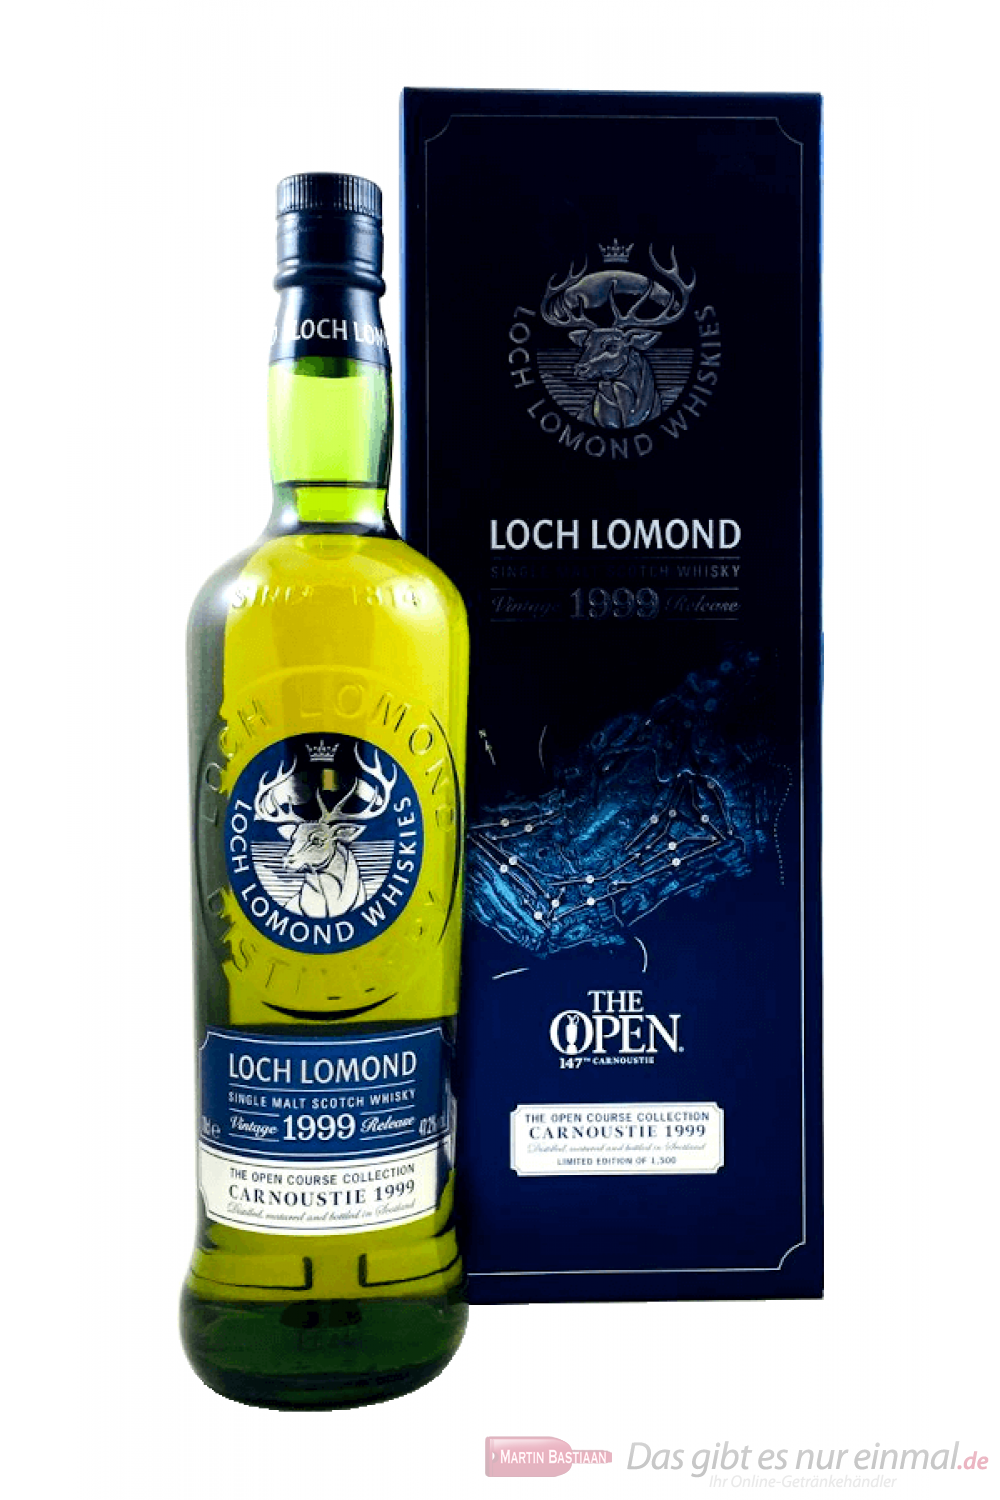 Loch Lomond The Open Course Collection Carnoustie 1999 Whisky 0,7l